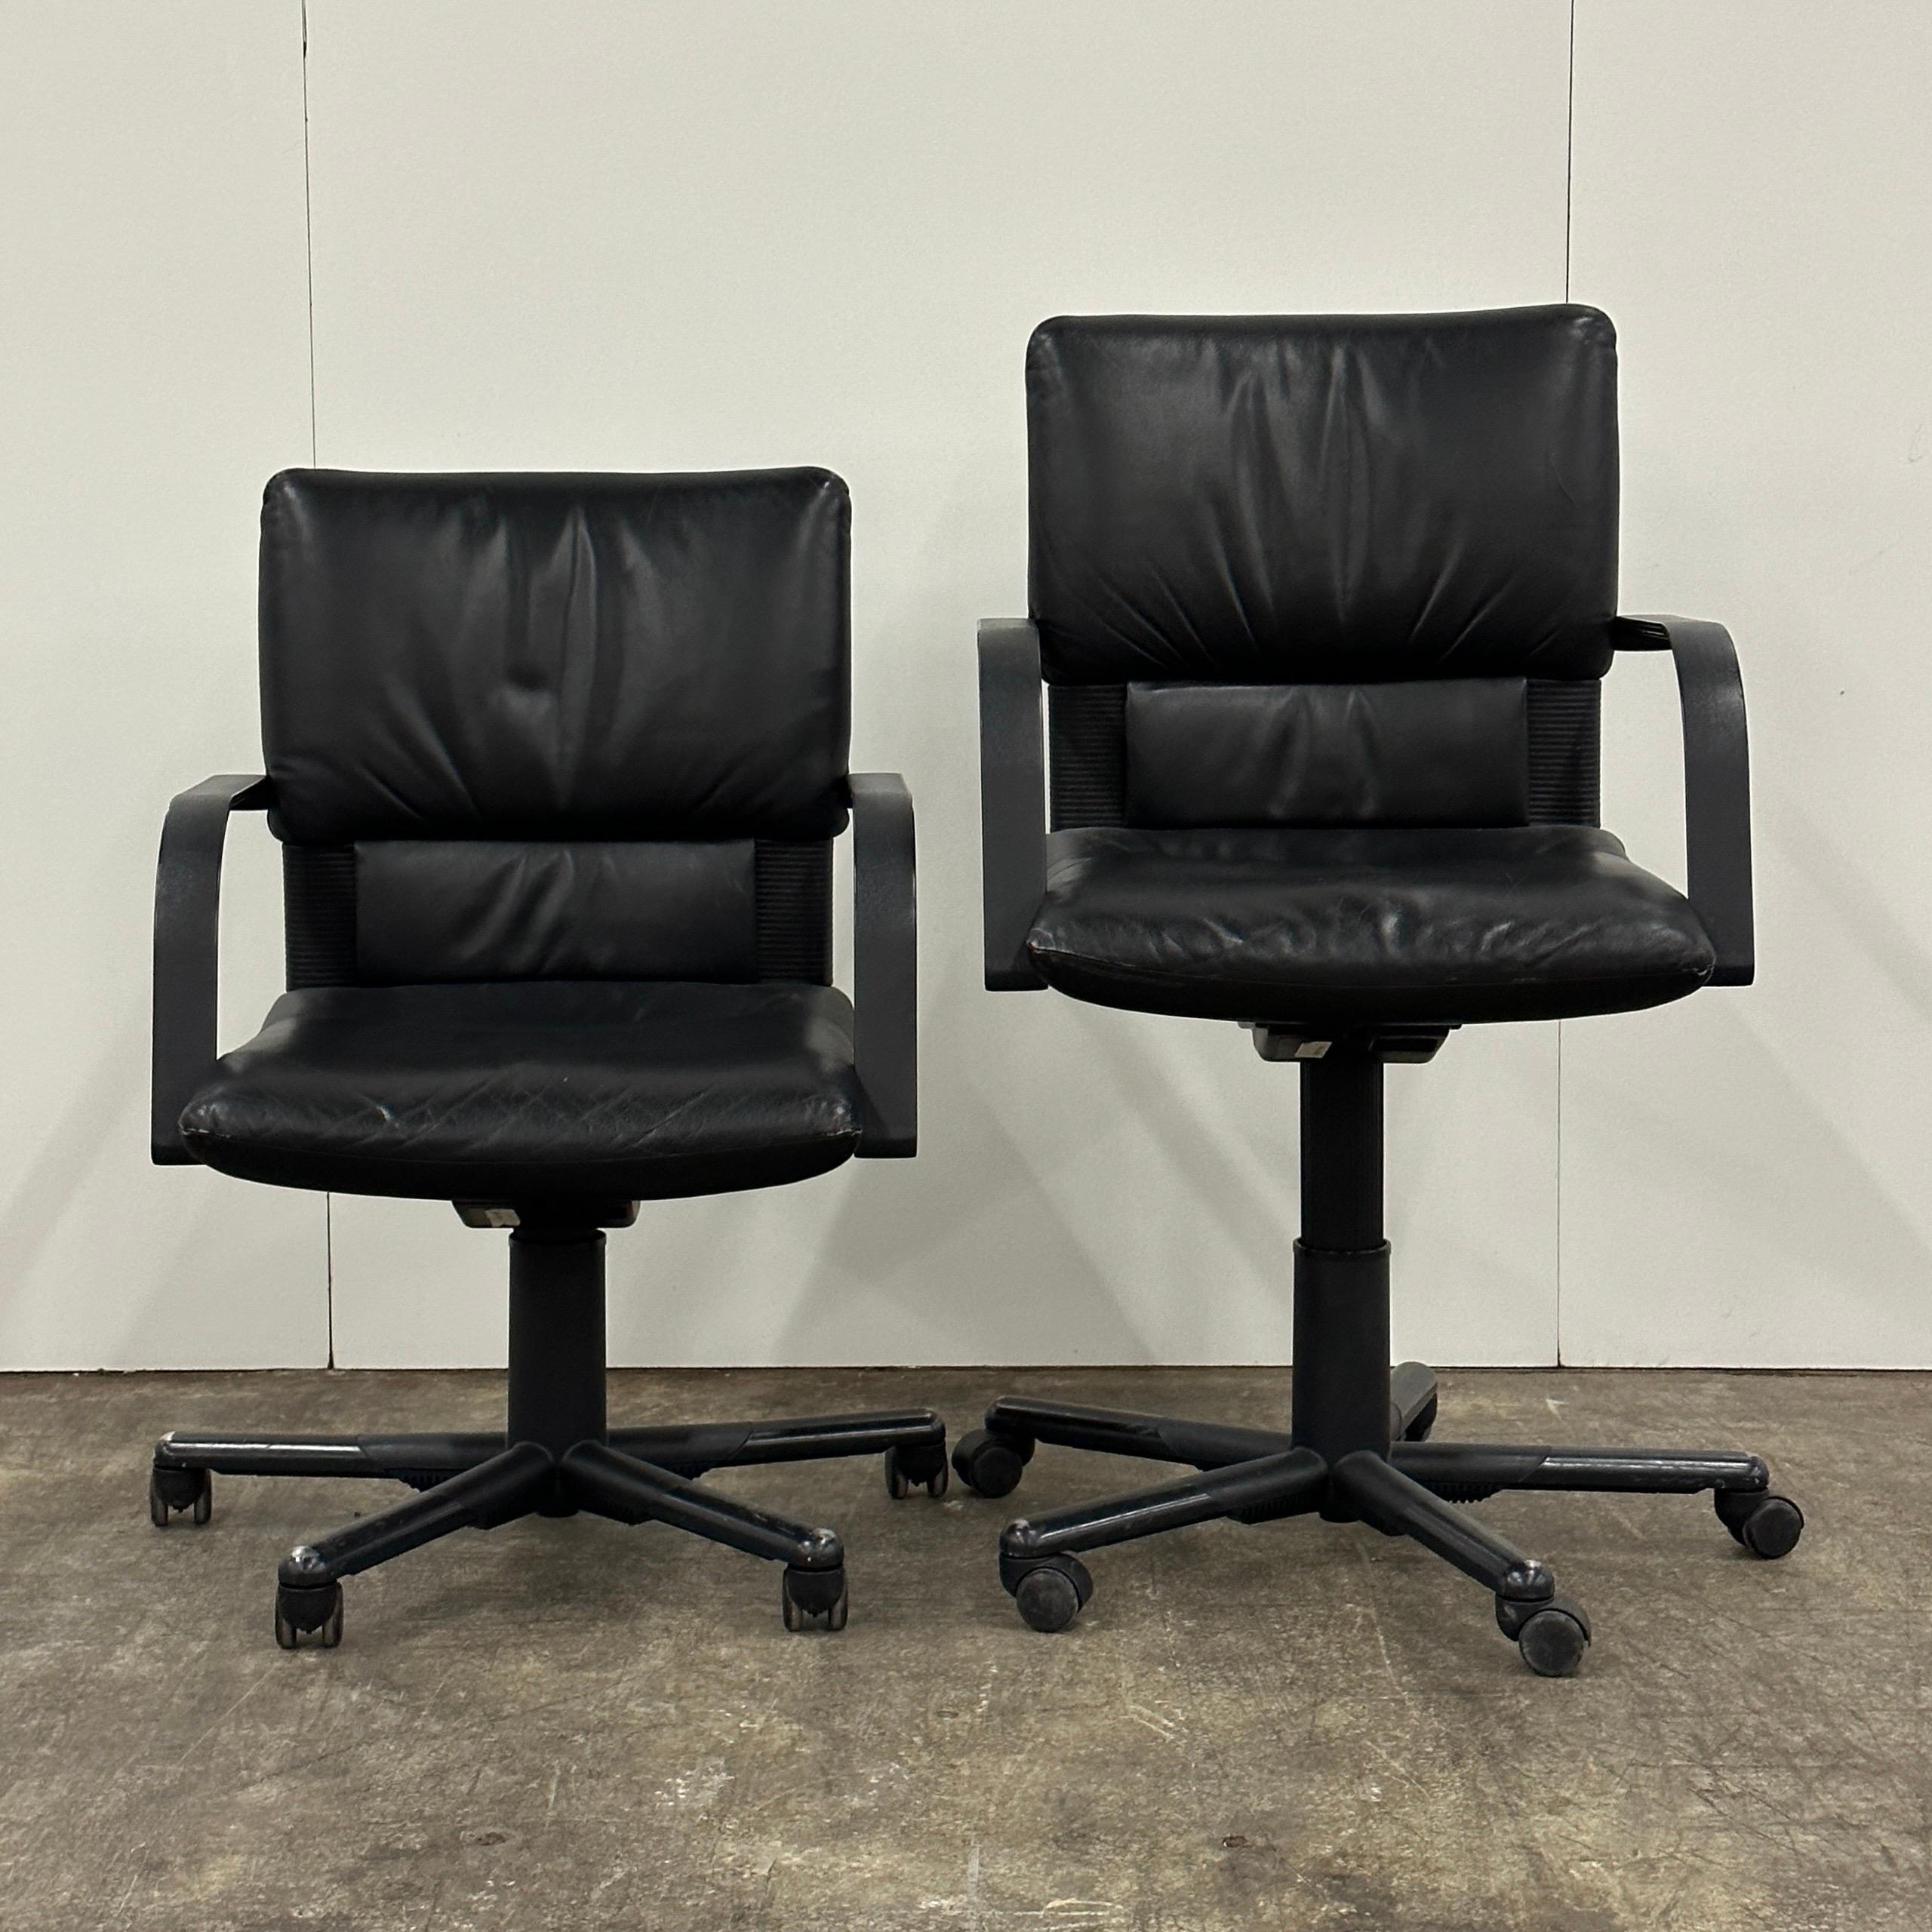 Premium leather construction with swivel base. Height adjustable and pairs perfectly with a desk or conference seating.

Price is for the set. Contact us if you'd like to purchase a single item.